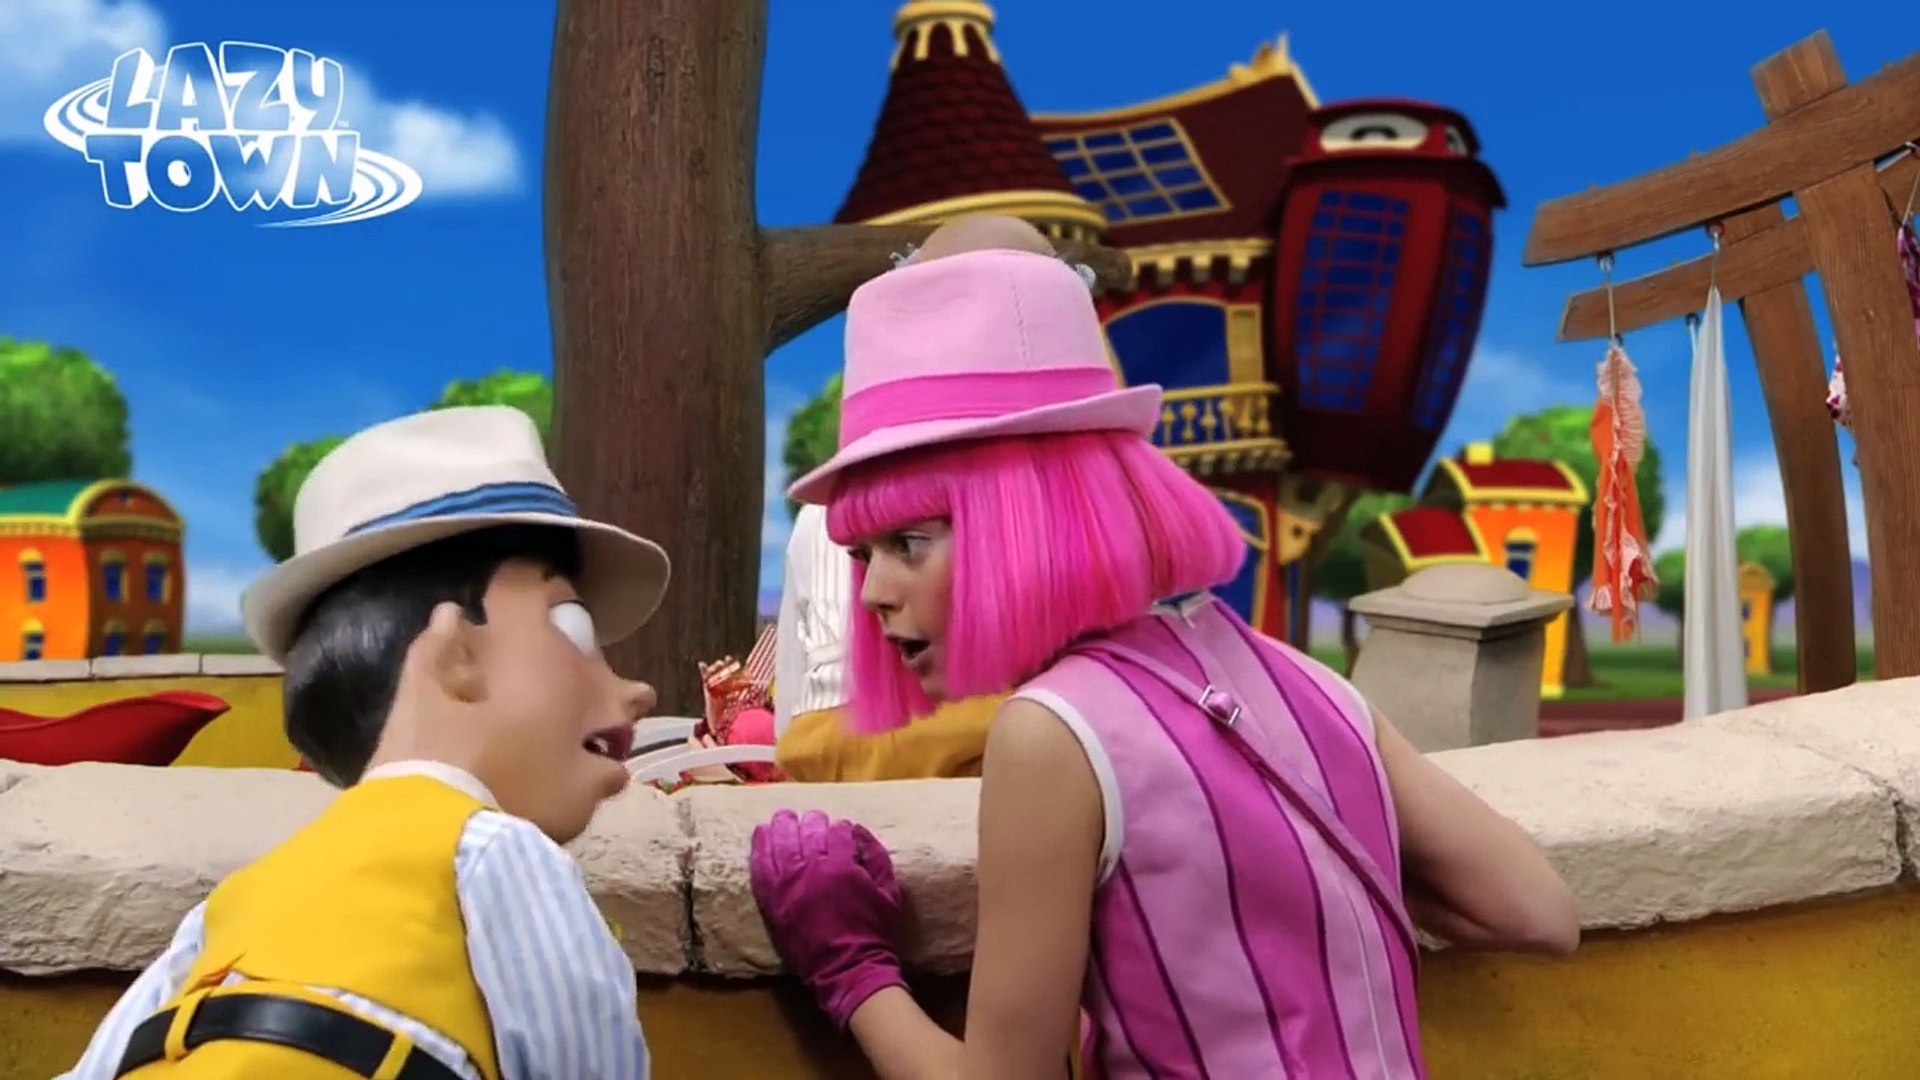 Lazy Town We Are Number One Full Episode Robbies Dream Team Season 4 Full Episode Video Dailymotion - noones lazy in lazytown roblox id code